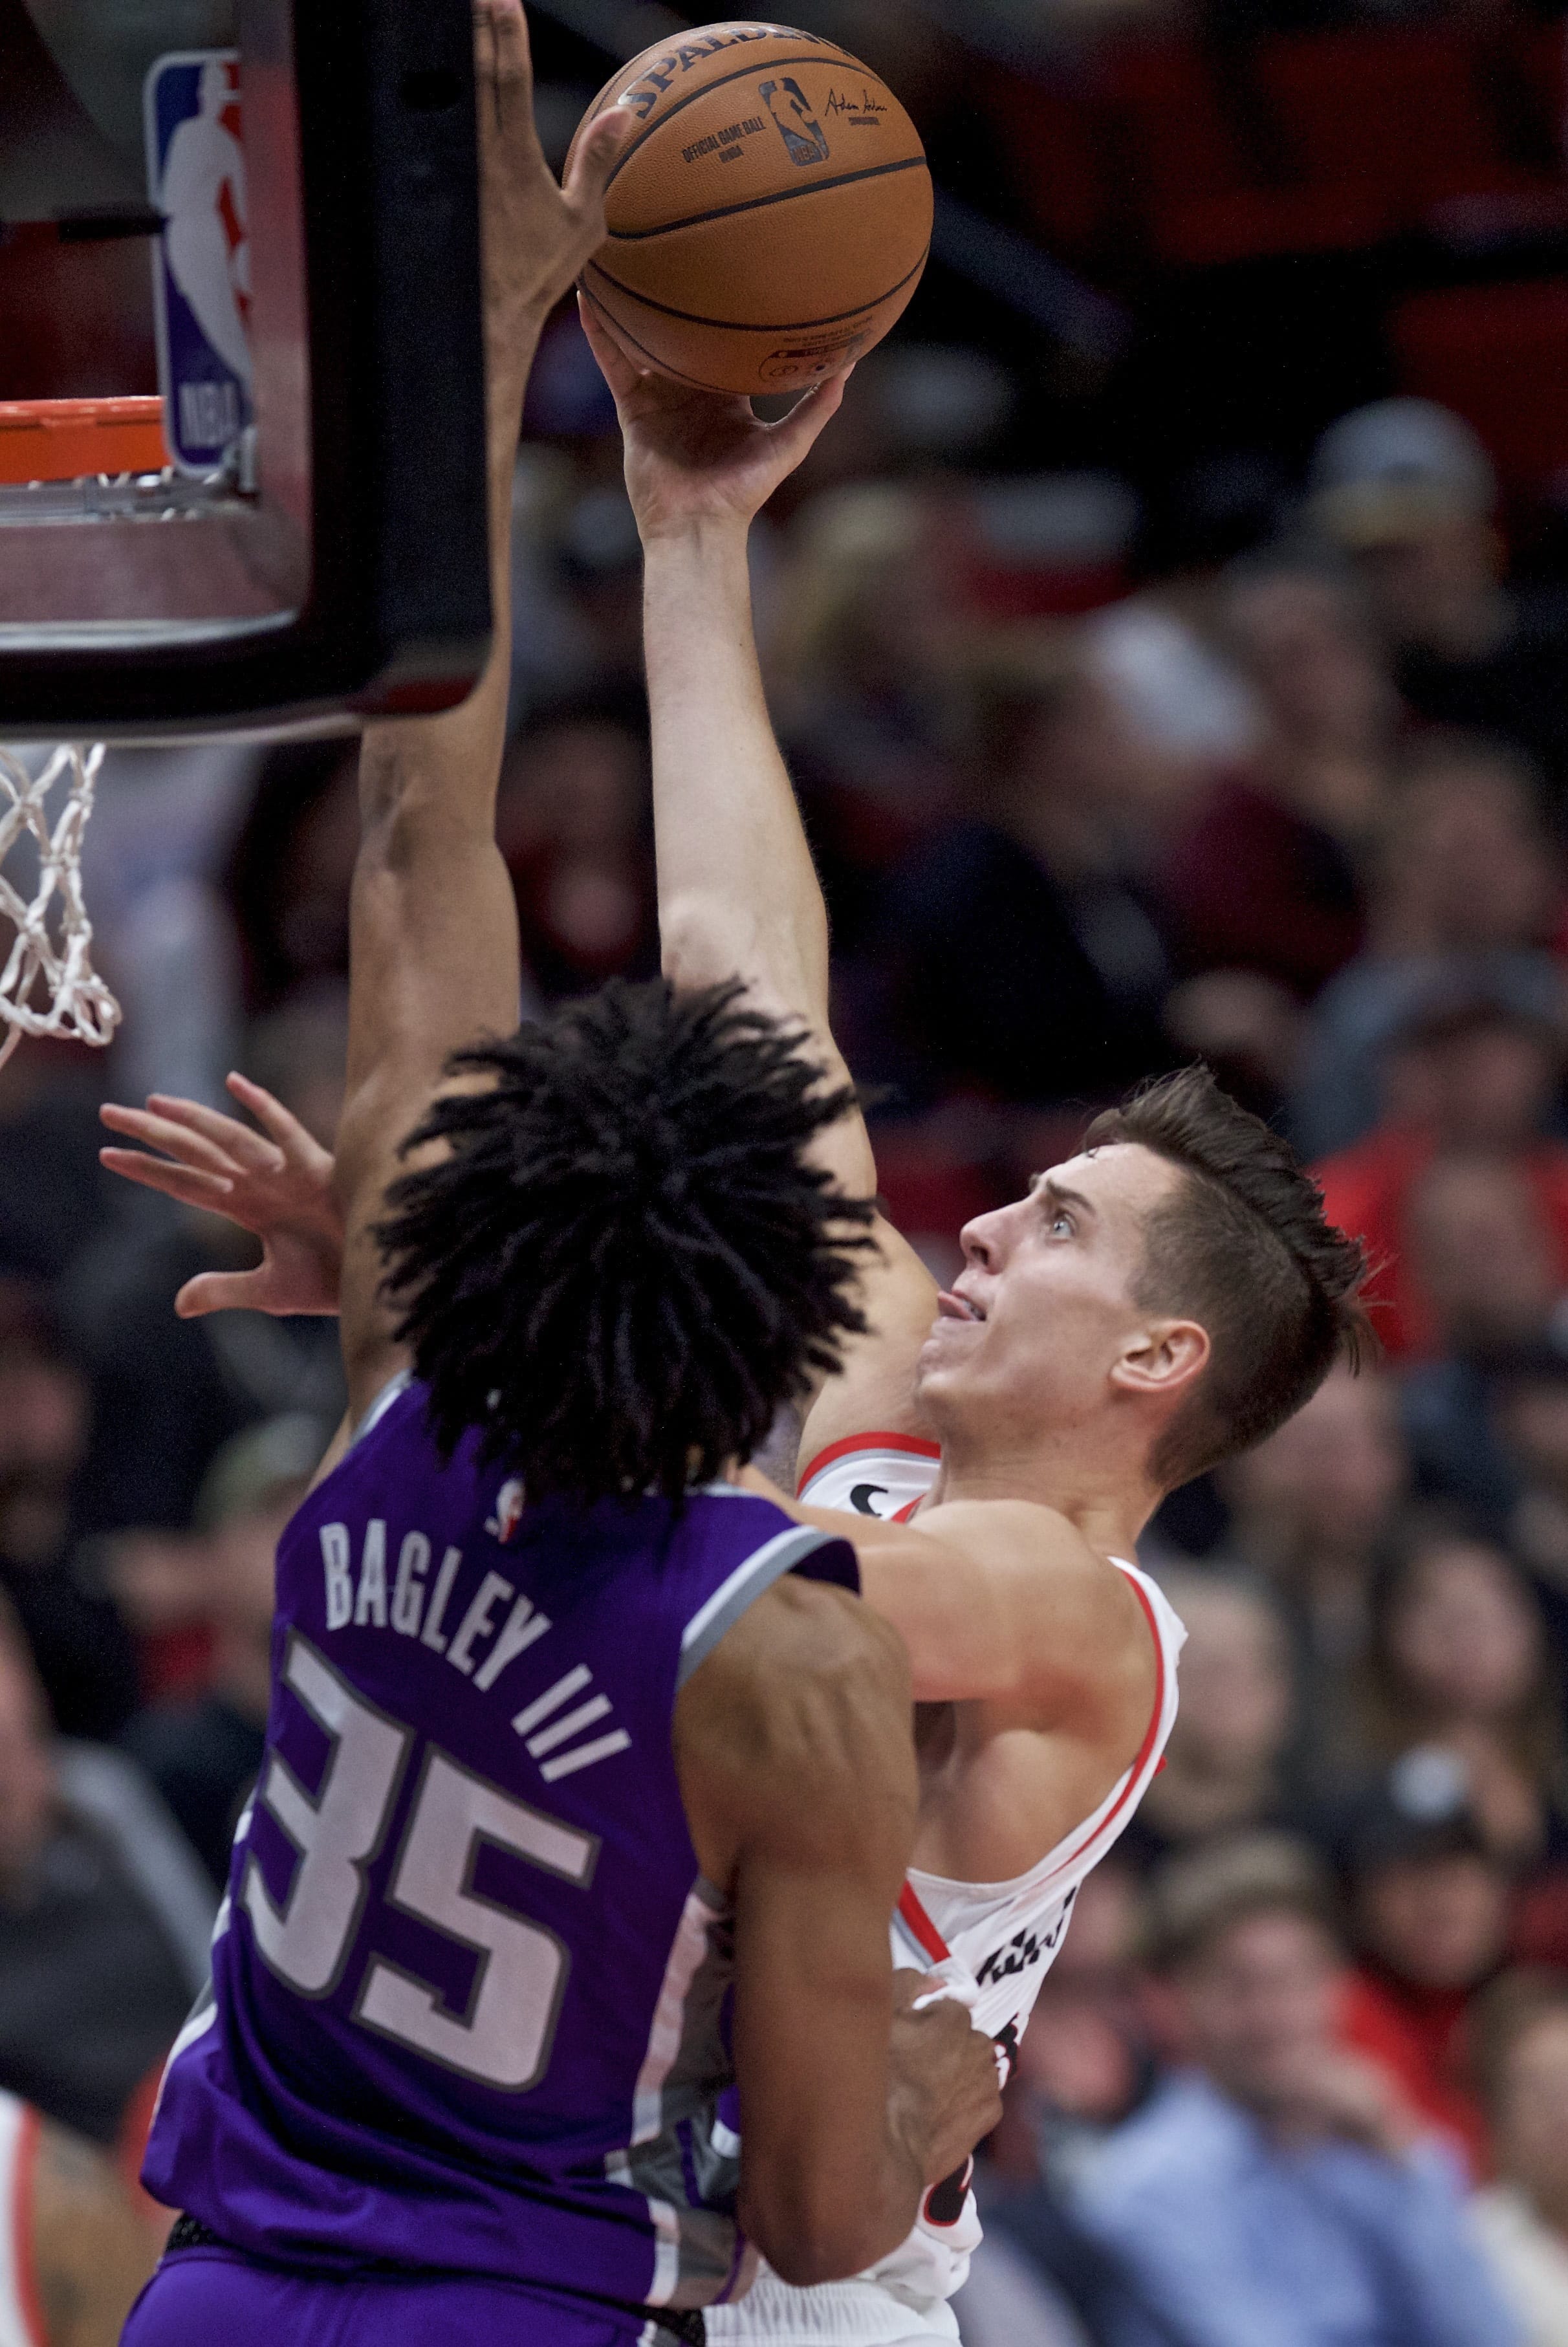 Portland Trail Blazers forward Zach Collins, right, shoots over Sacramento Kings forward Marvin Bagley III during the second half of an NBA preseason basketball game in Portland, Ore., Friday, Oct. 12, 2018.